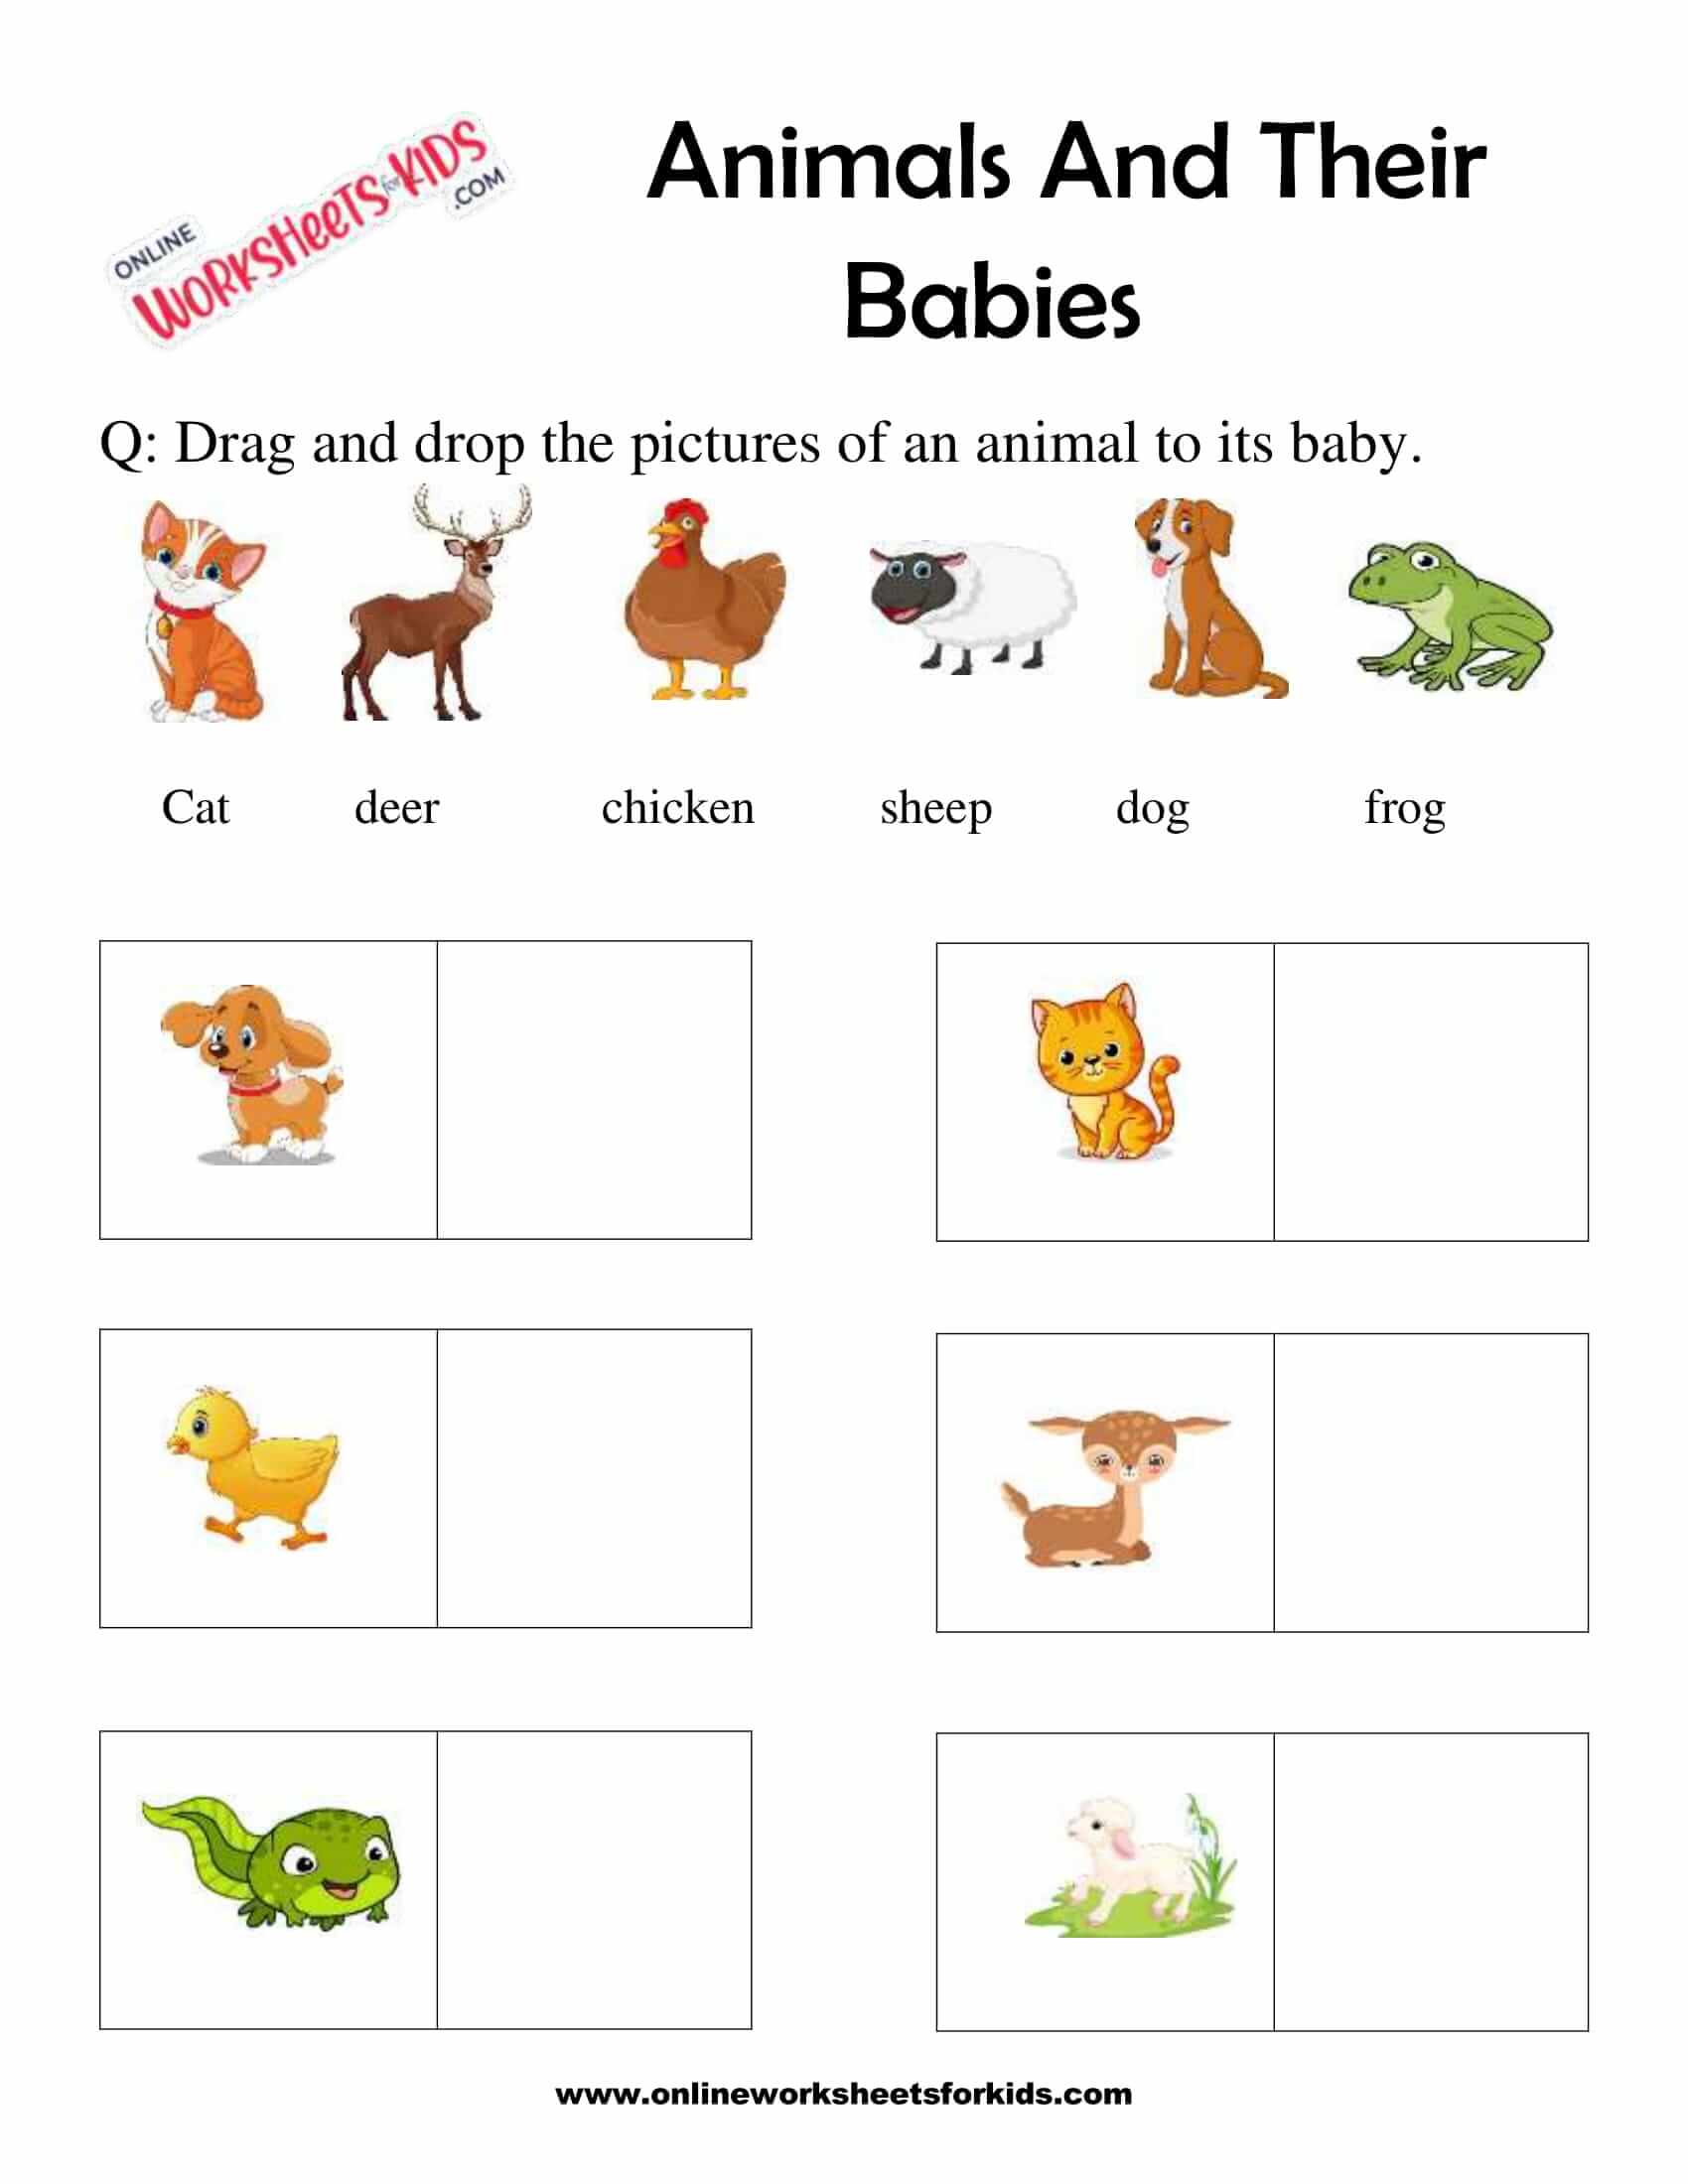 Animal And Their Babies Worksheet for Grade 1-6